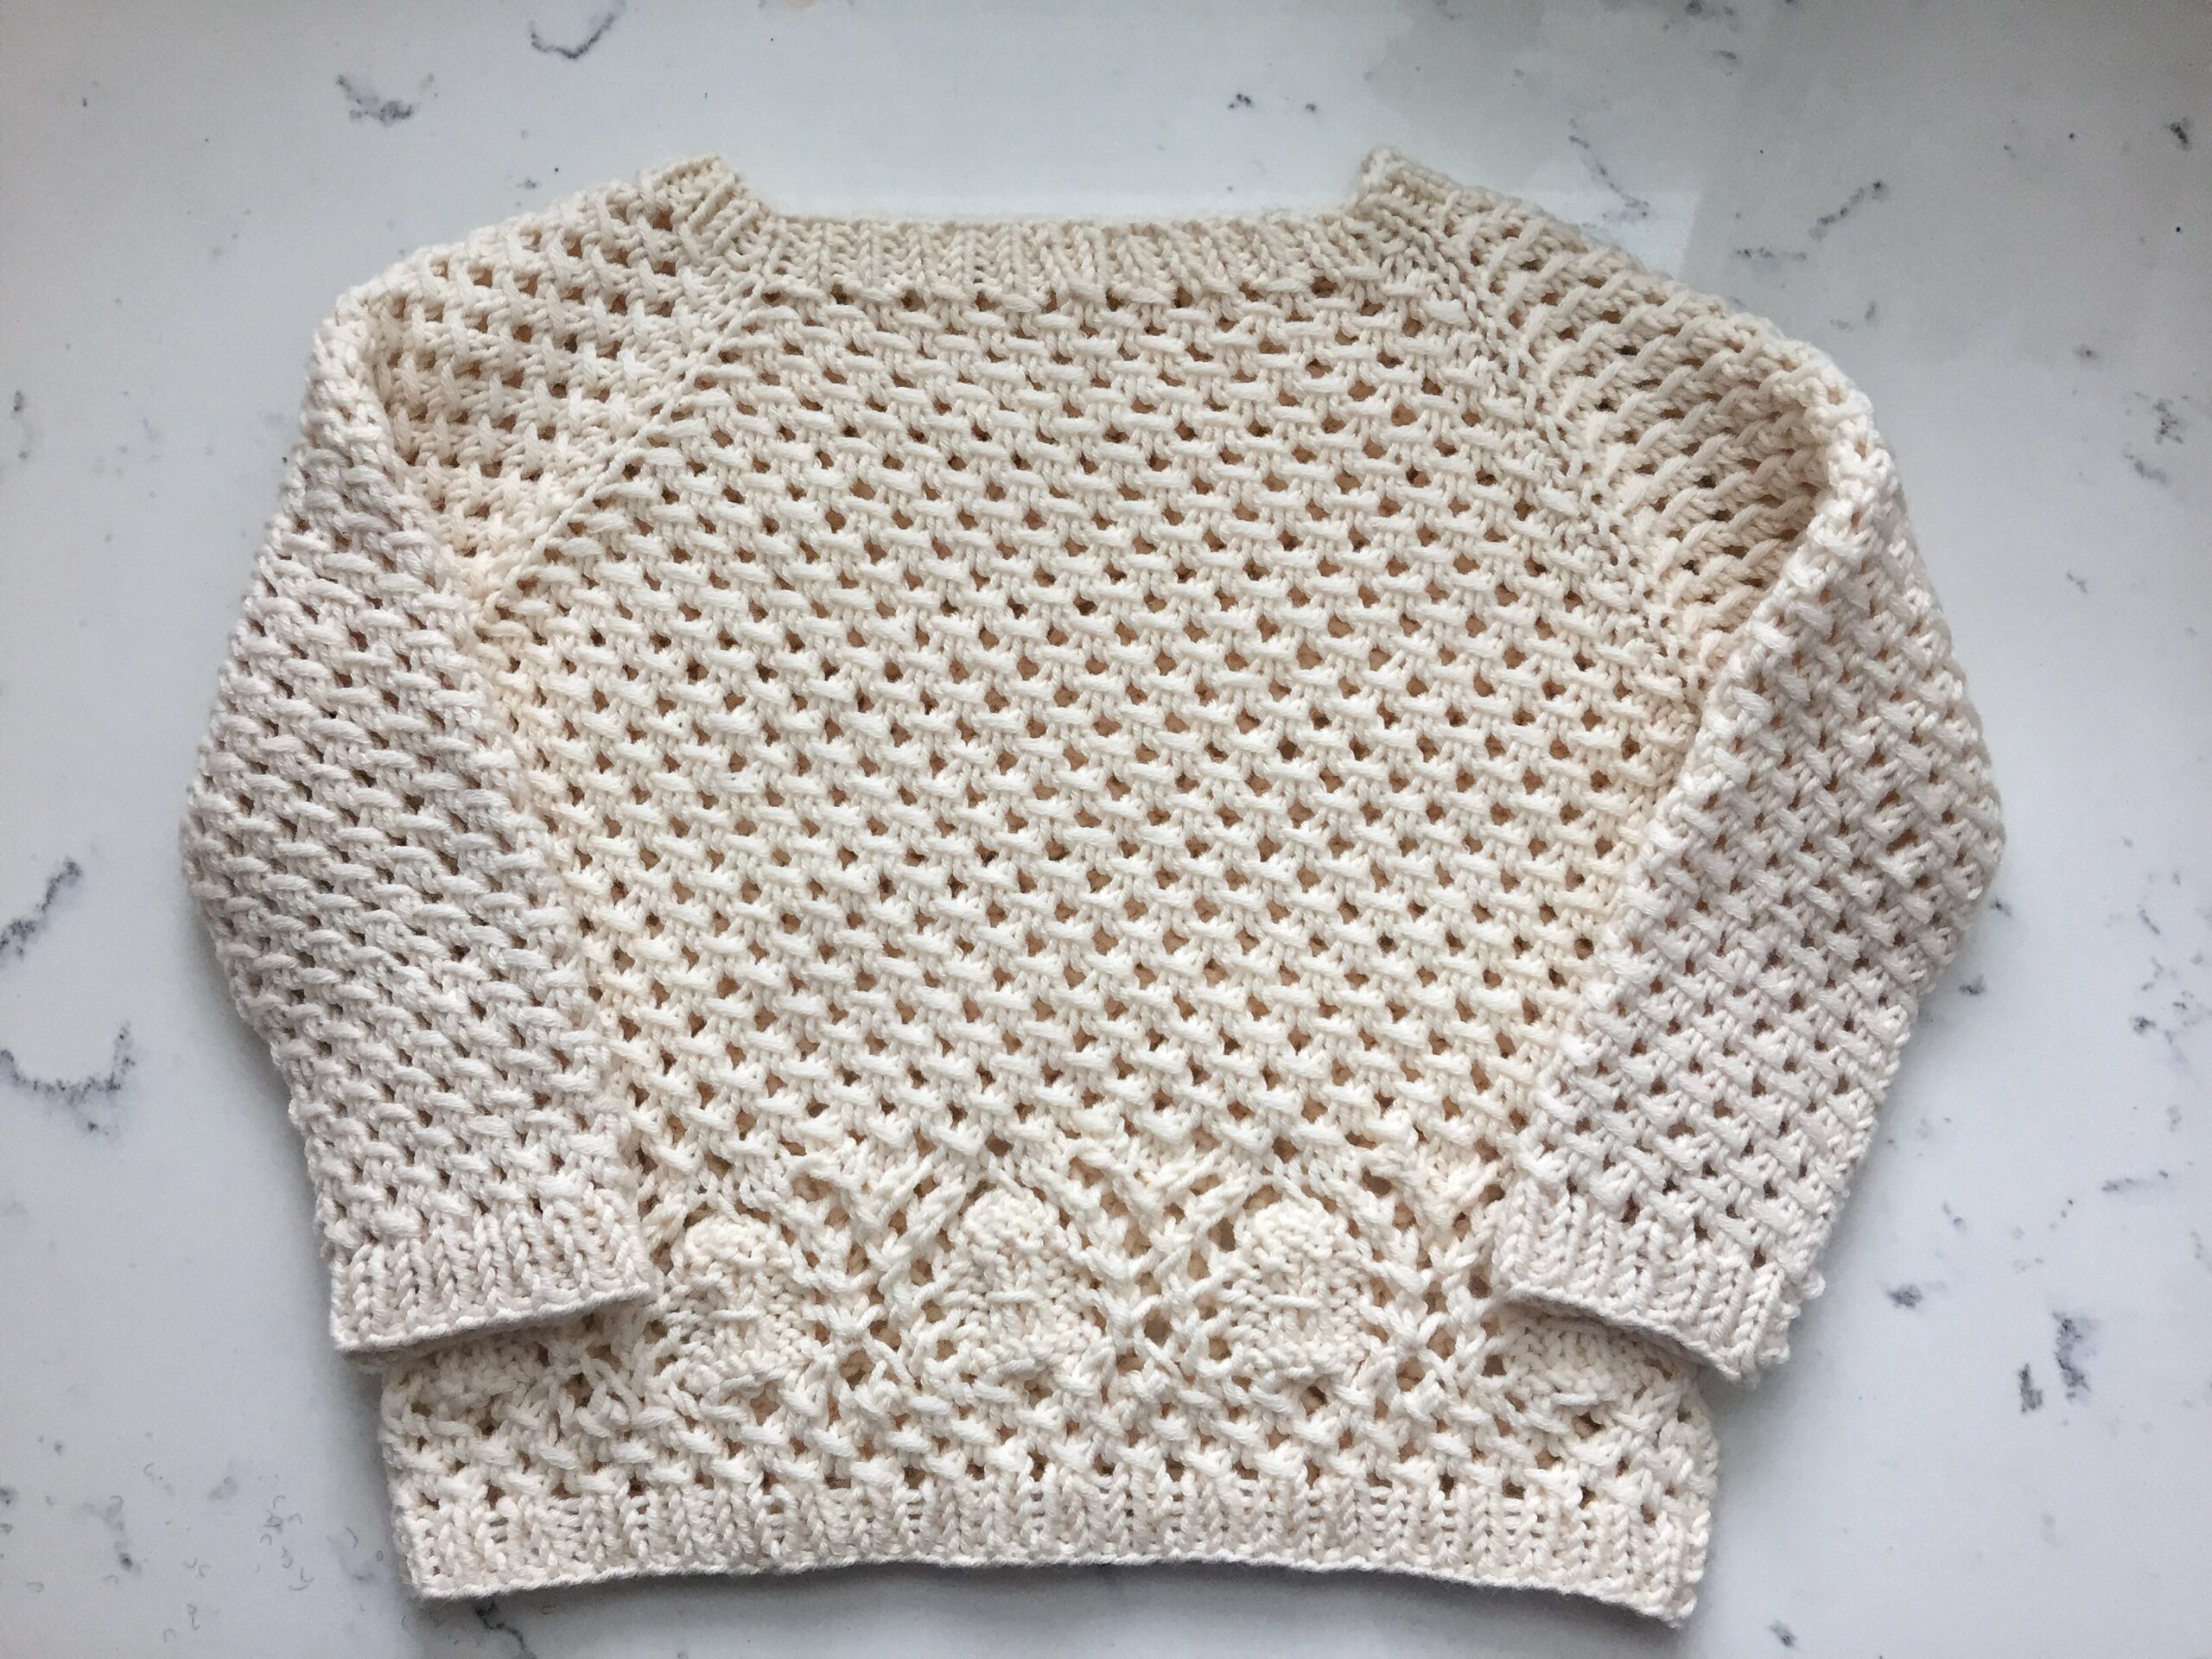 A cream pullover raglan in DK weight yarn in an allover mesh stitch with sand dollar lace motif across the hips